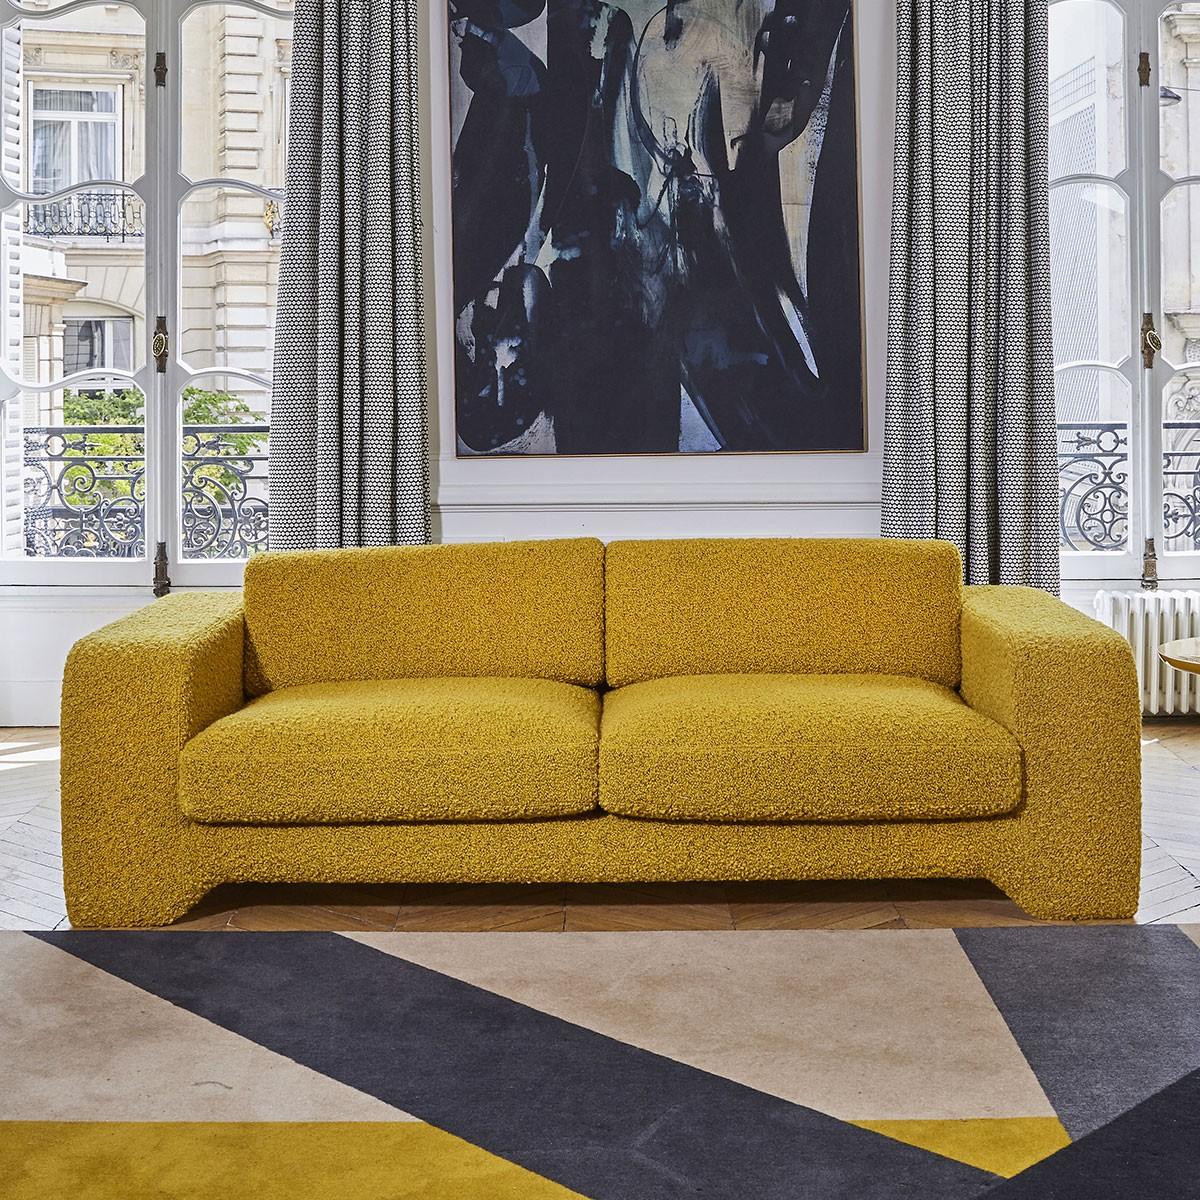 Popus Editions Giovanna 4 seater sofa in Yellow Como velvet upholstery

Giovanna is a sofa with a strong profile. A sober, plush line, with this famous detail that changes everything, so as not to forget its strength of character and this charming